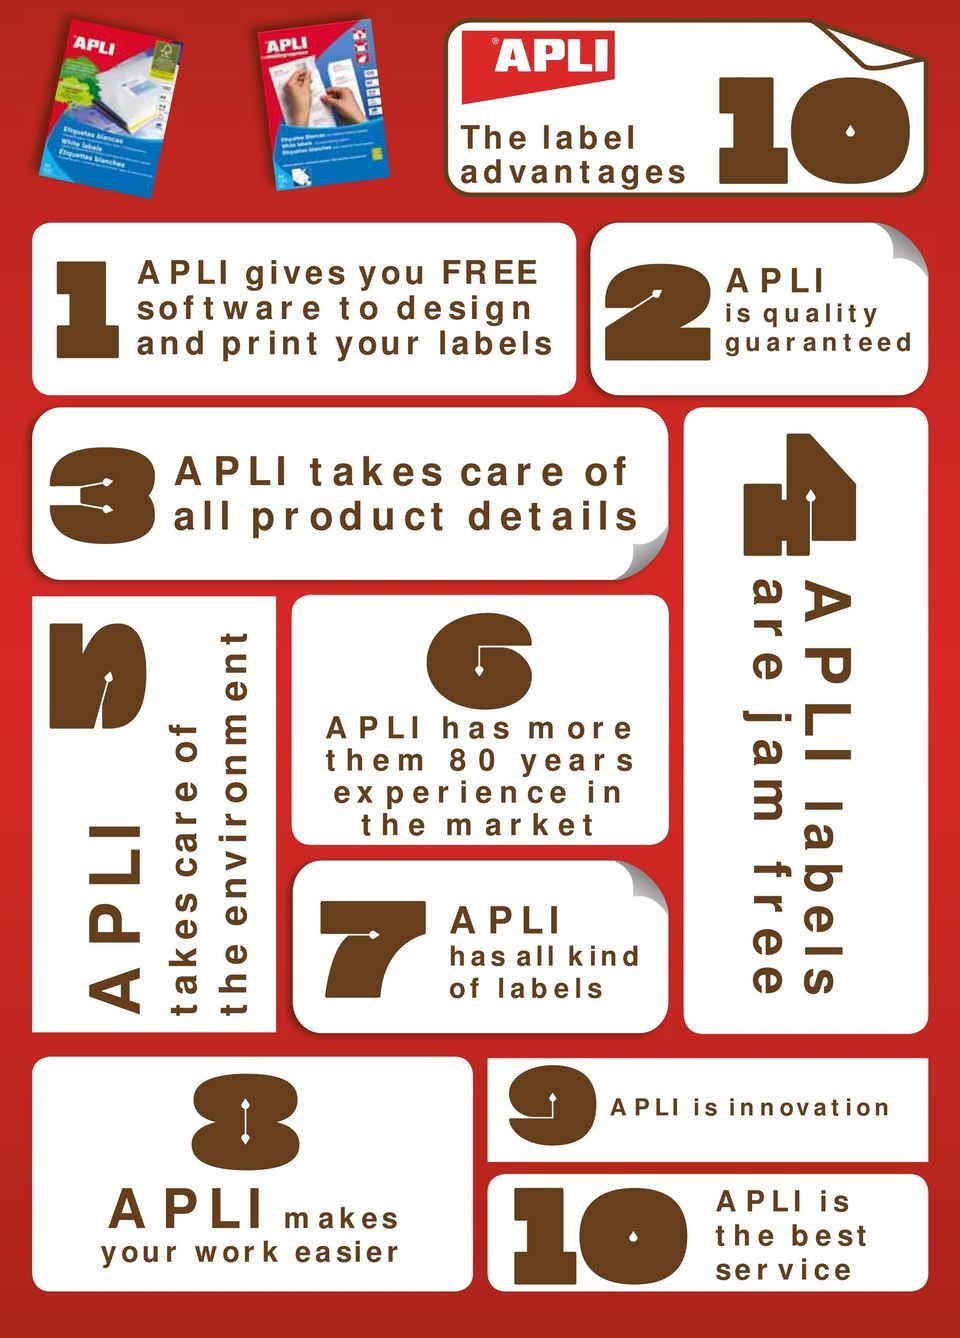 details 6 APLI has more them 80 years experience in the market 7 APLI has all kind of labels 4